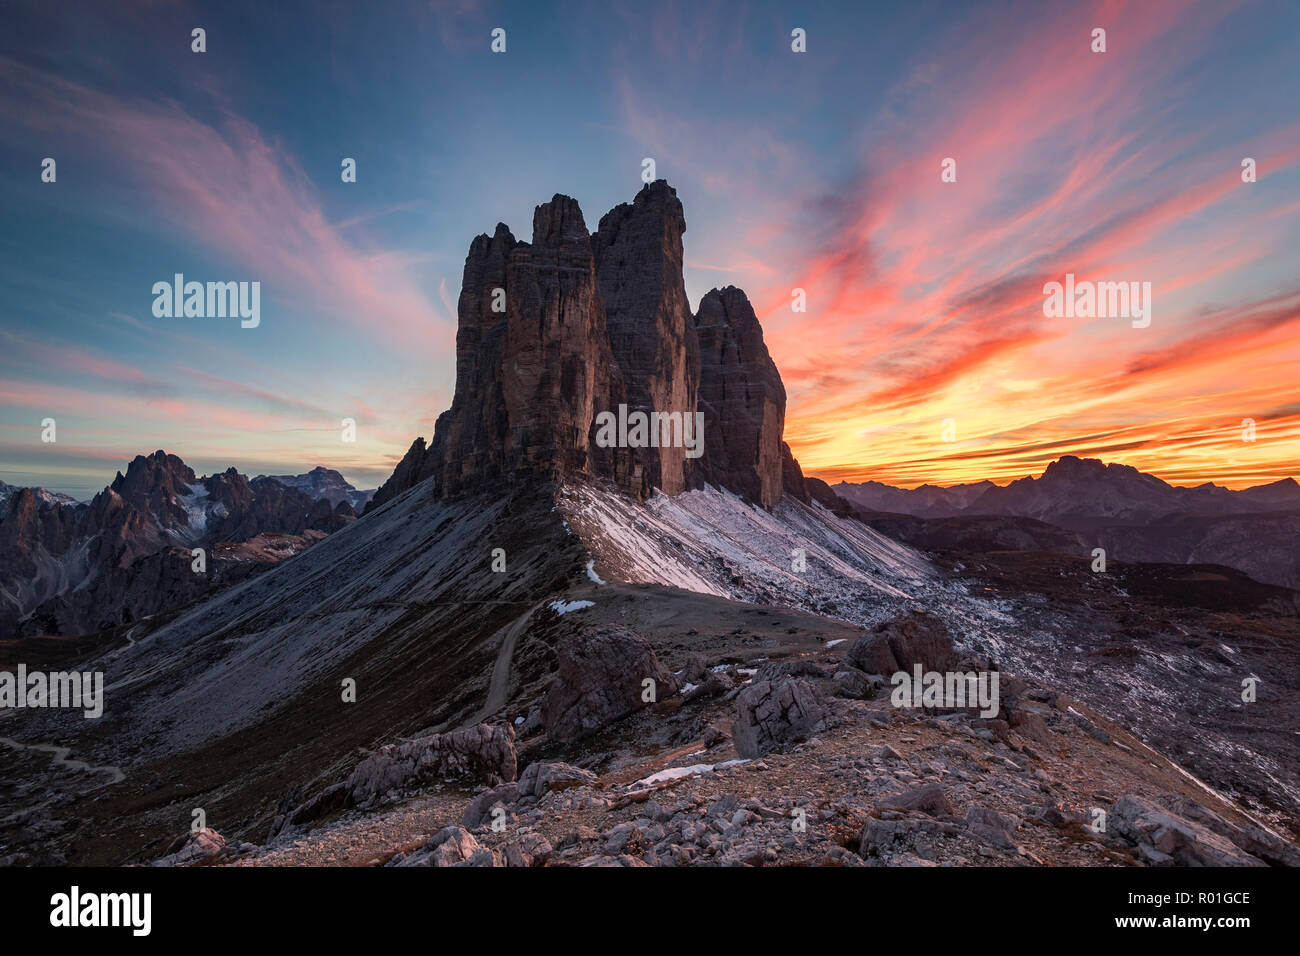 View from the Patternsattel to the Three Peaks, Sunset, Sexten Dolomites, South Tyrol, Trentino-Alto Adige, Italy Stock Photo